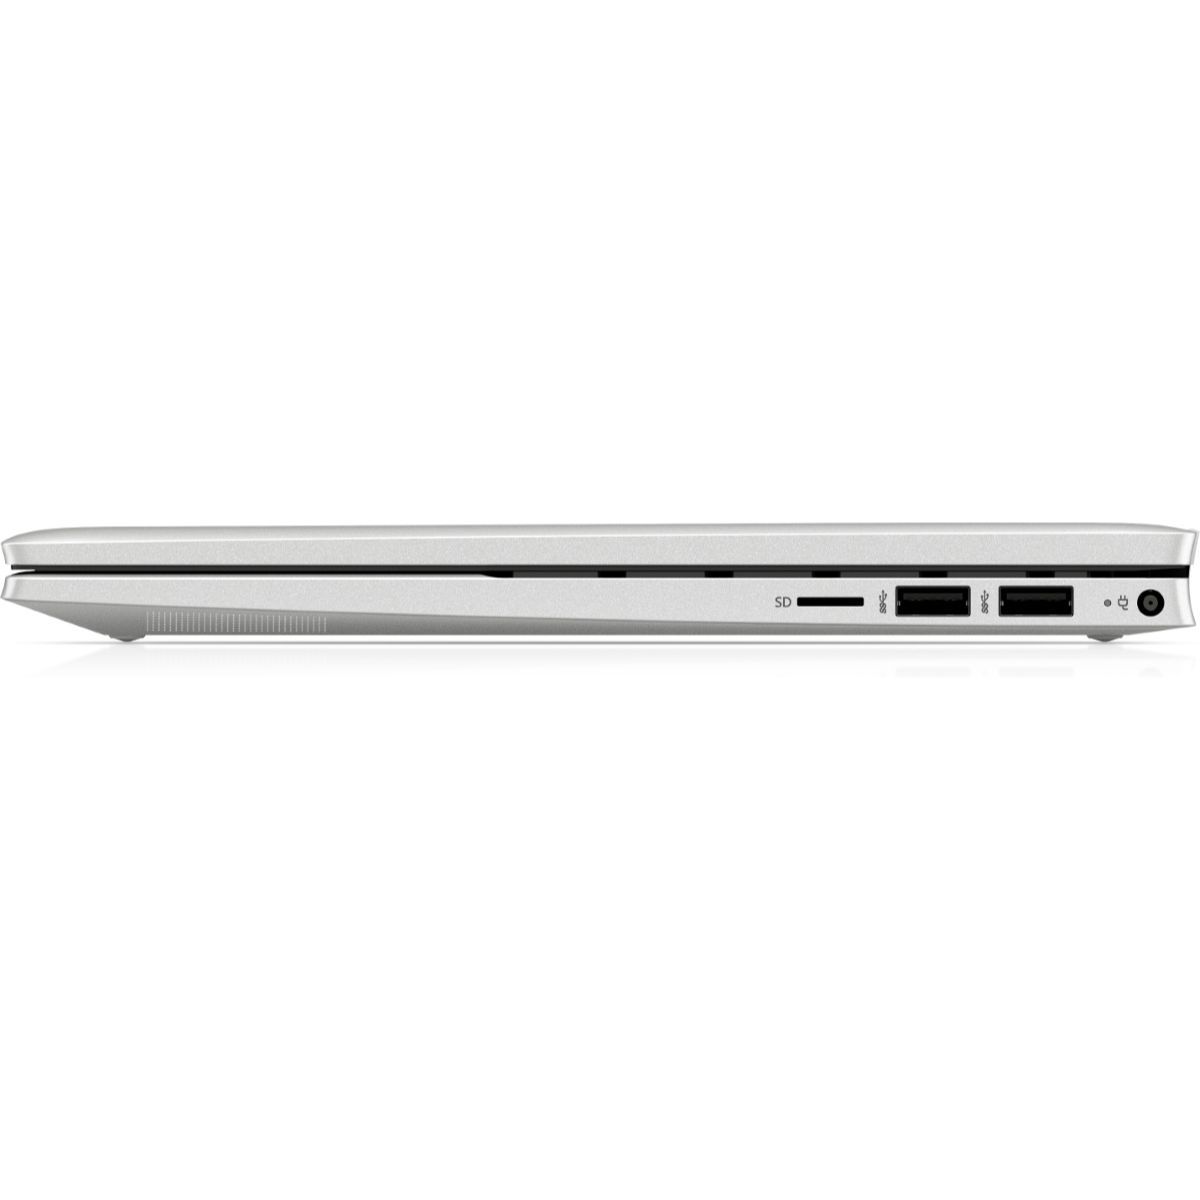 HP 2-in-1 Pavilion x360 14-dy0505sa 14" Touch Intel Core i3 4GB RAM 256GB SSD